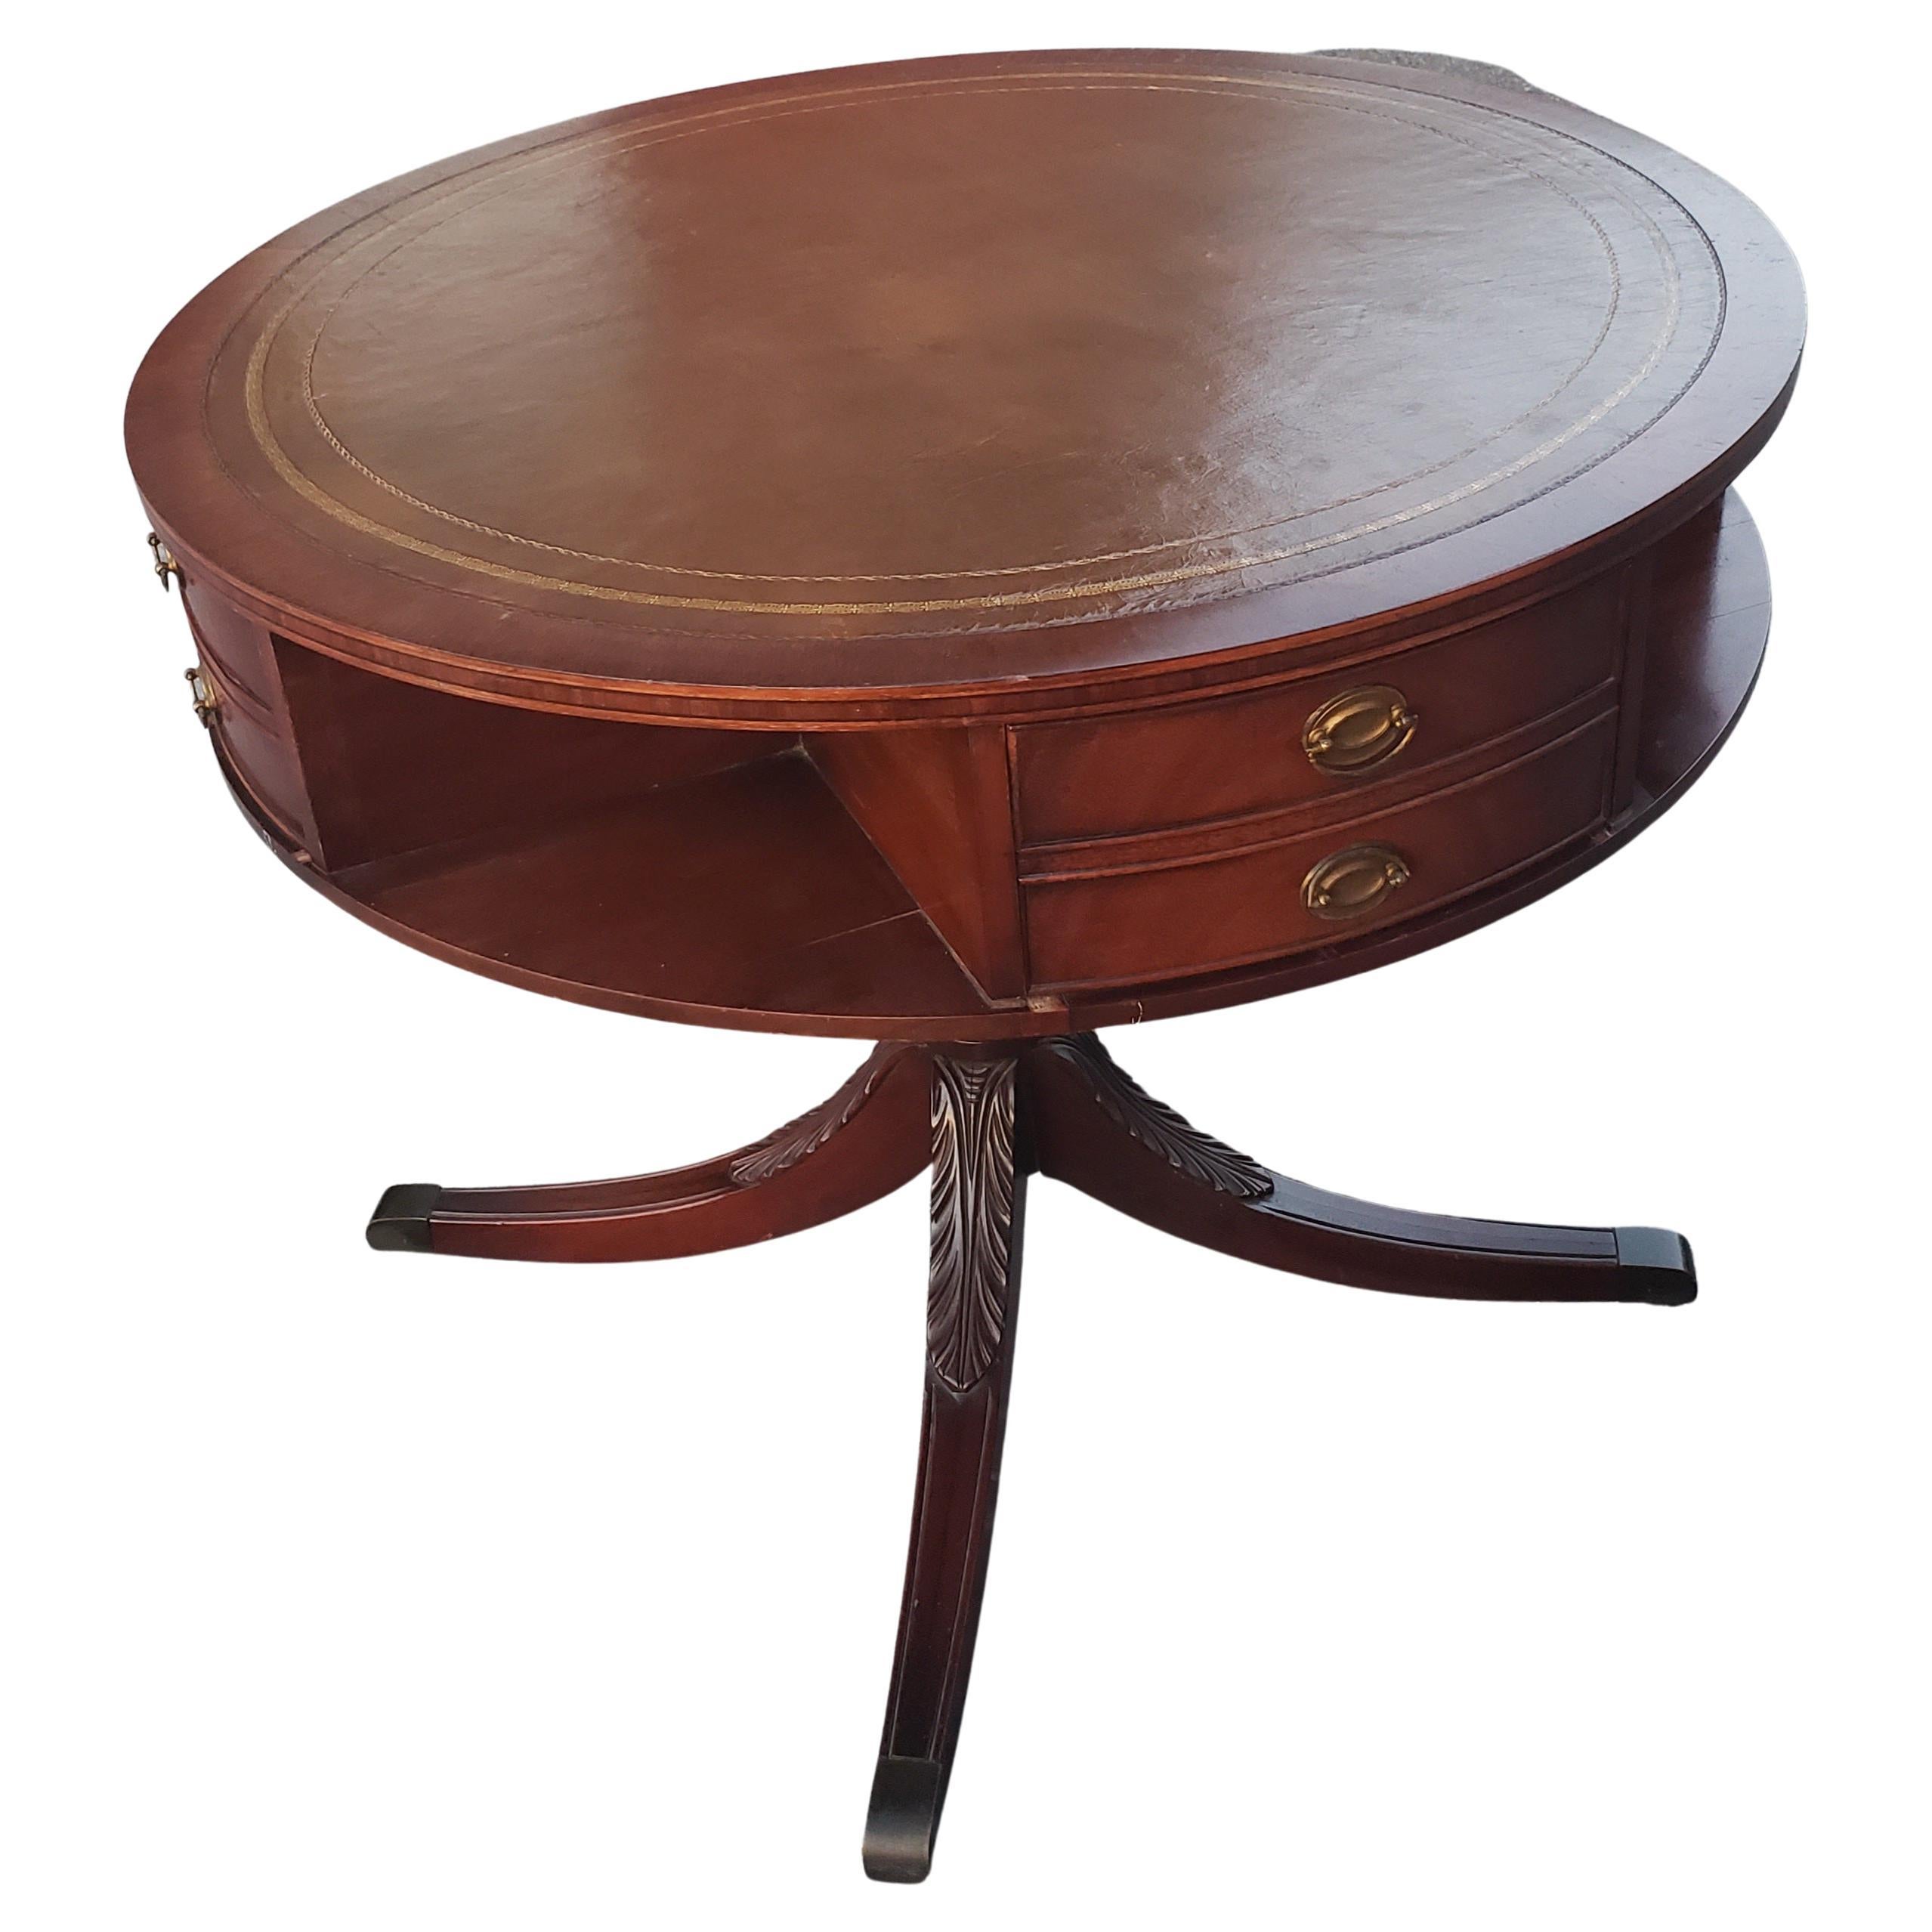 Woodwork Banded Leather Stenciled Top Double Drum 4-drawer Mahogany Center Table, C 1940s For Sale